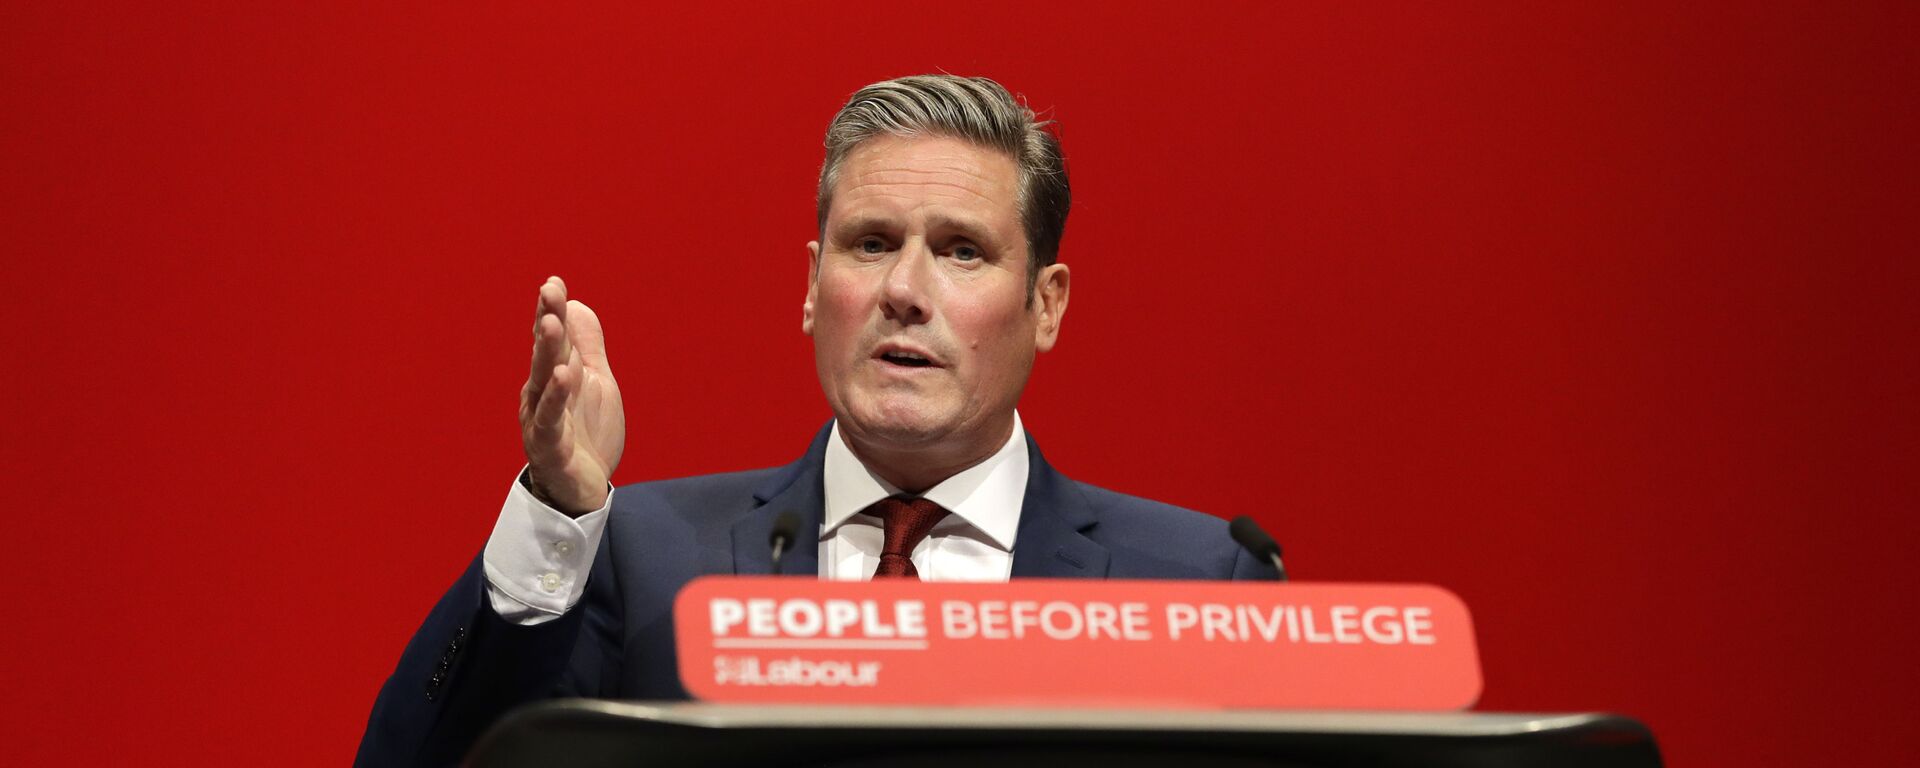 FILE - In this Monday, 23 September 2019 file photo, Britain's Shadow Brexit Secretary Sir Keir Starmer speaks on stage during the Labour Party Conference at the Brighton Centre in Brighton, England. - Sputnik International, 1920, 14.02.2021